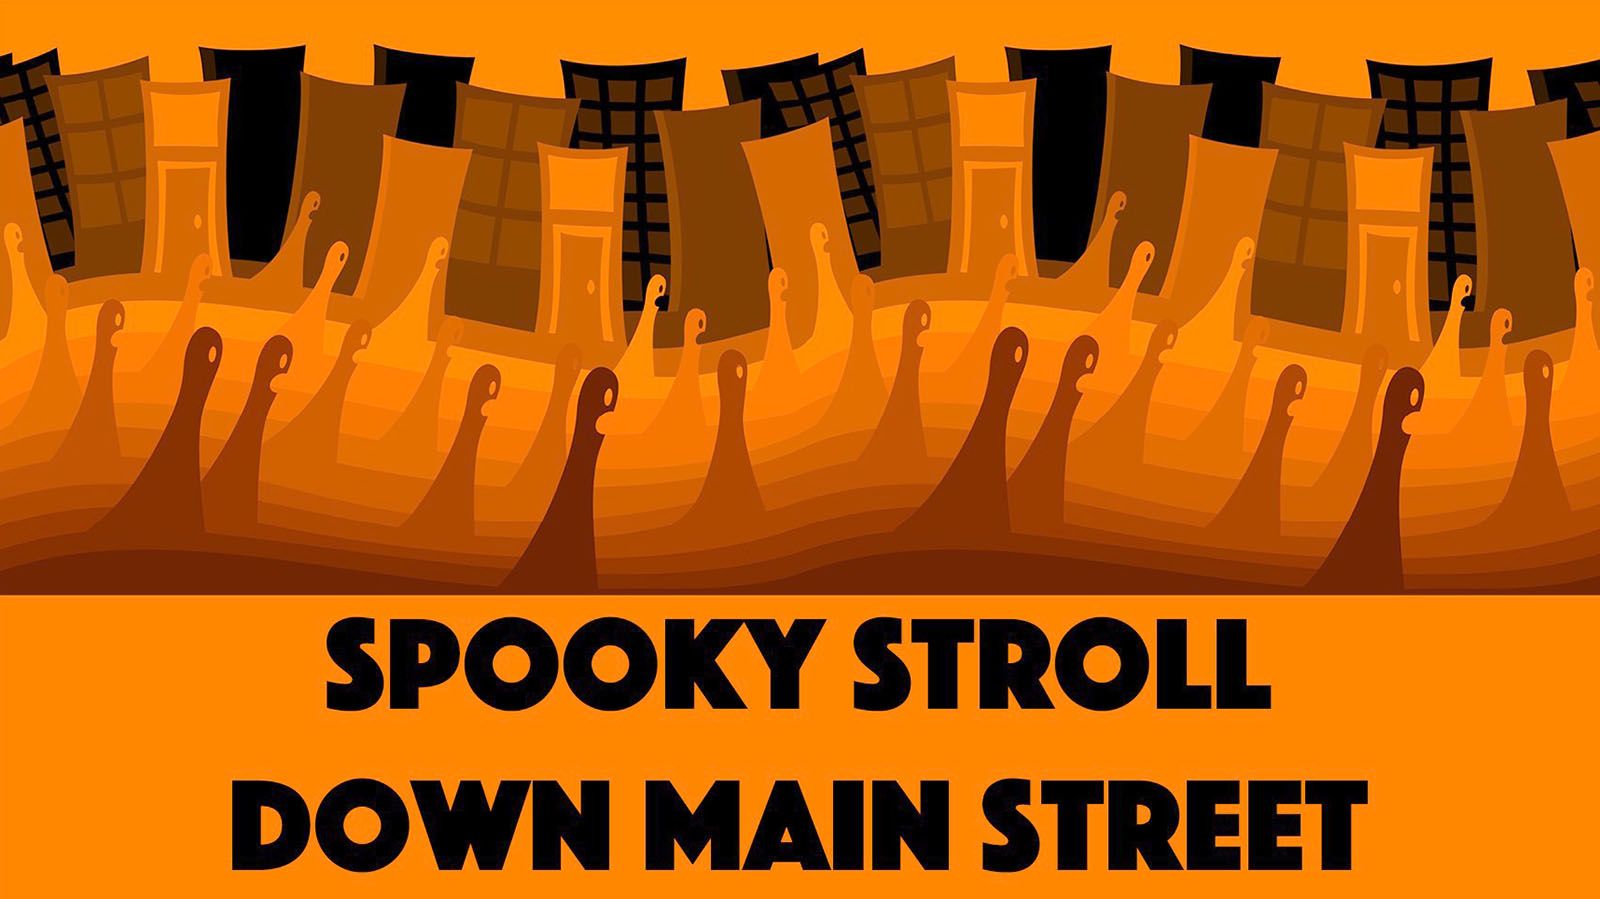 Take a spooky tour of West Main Street on Oct. 29.